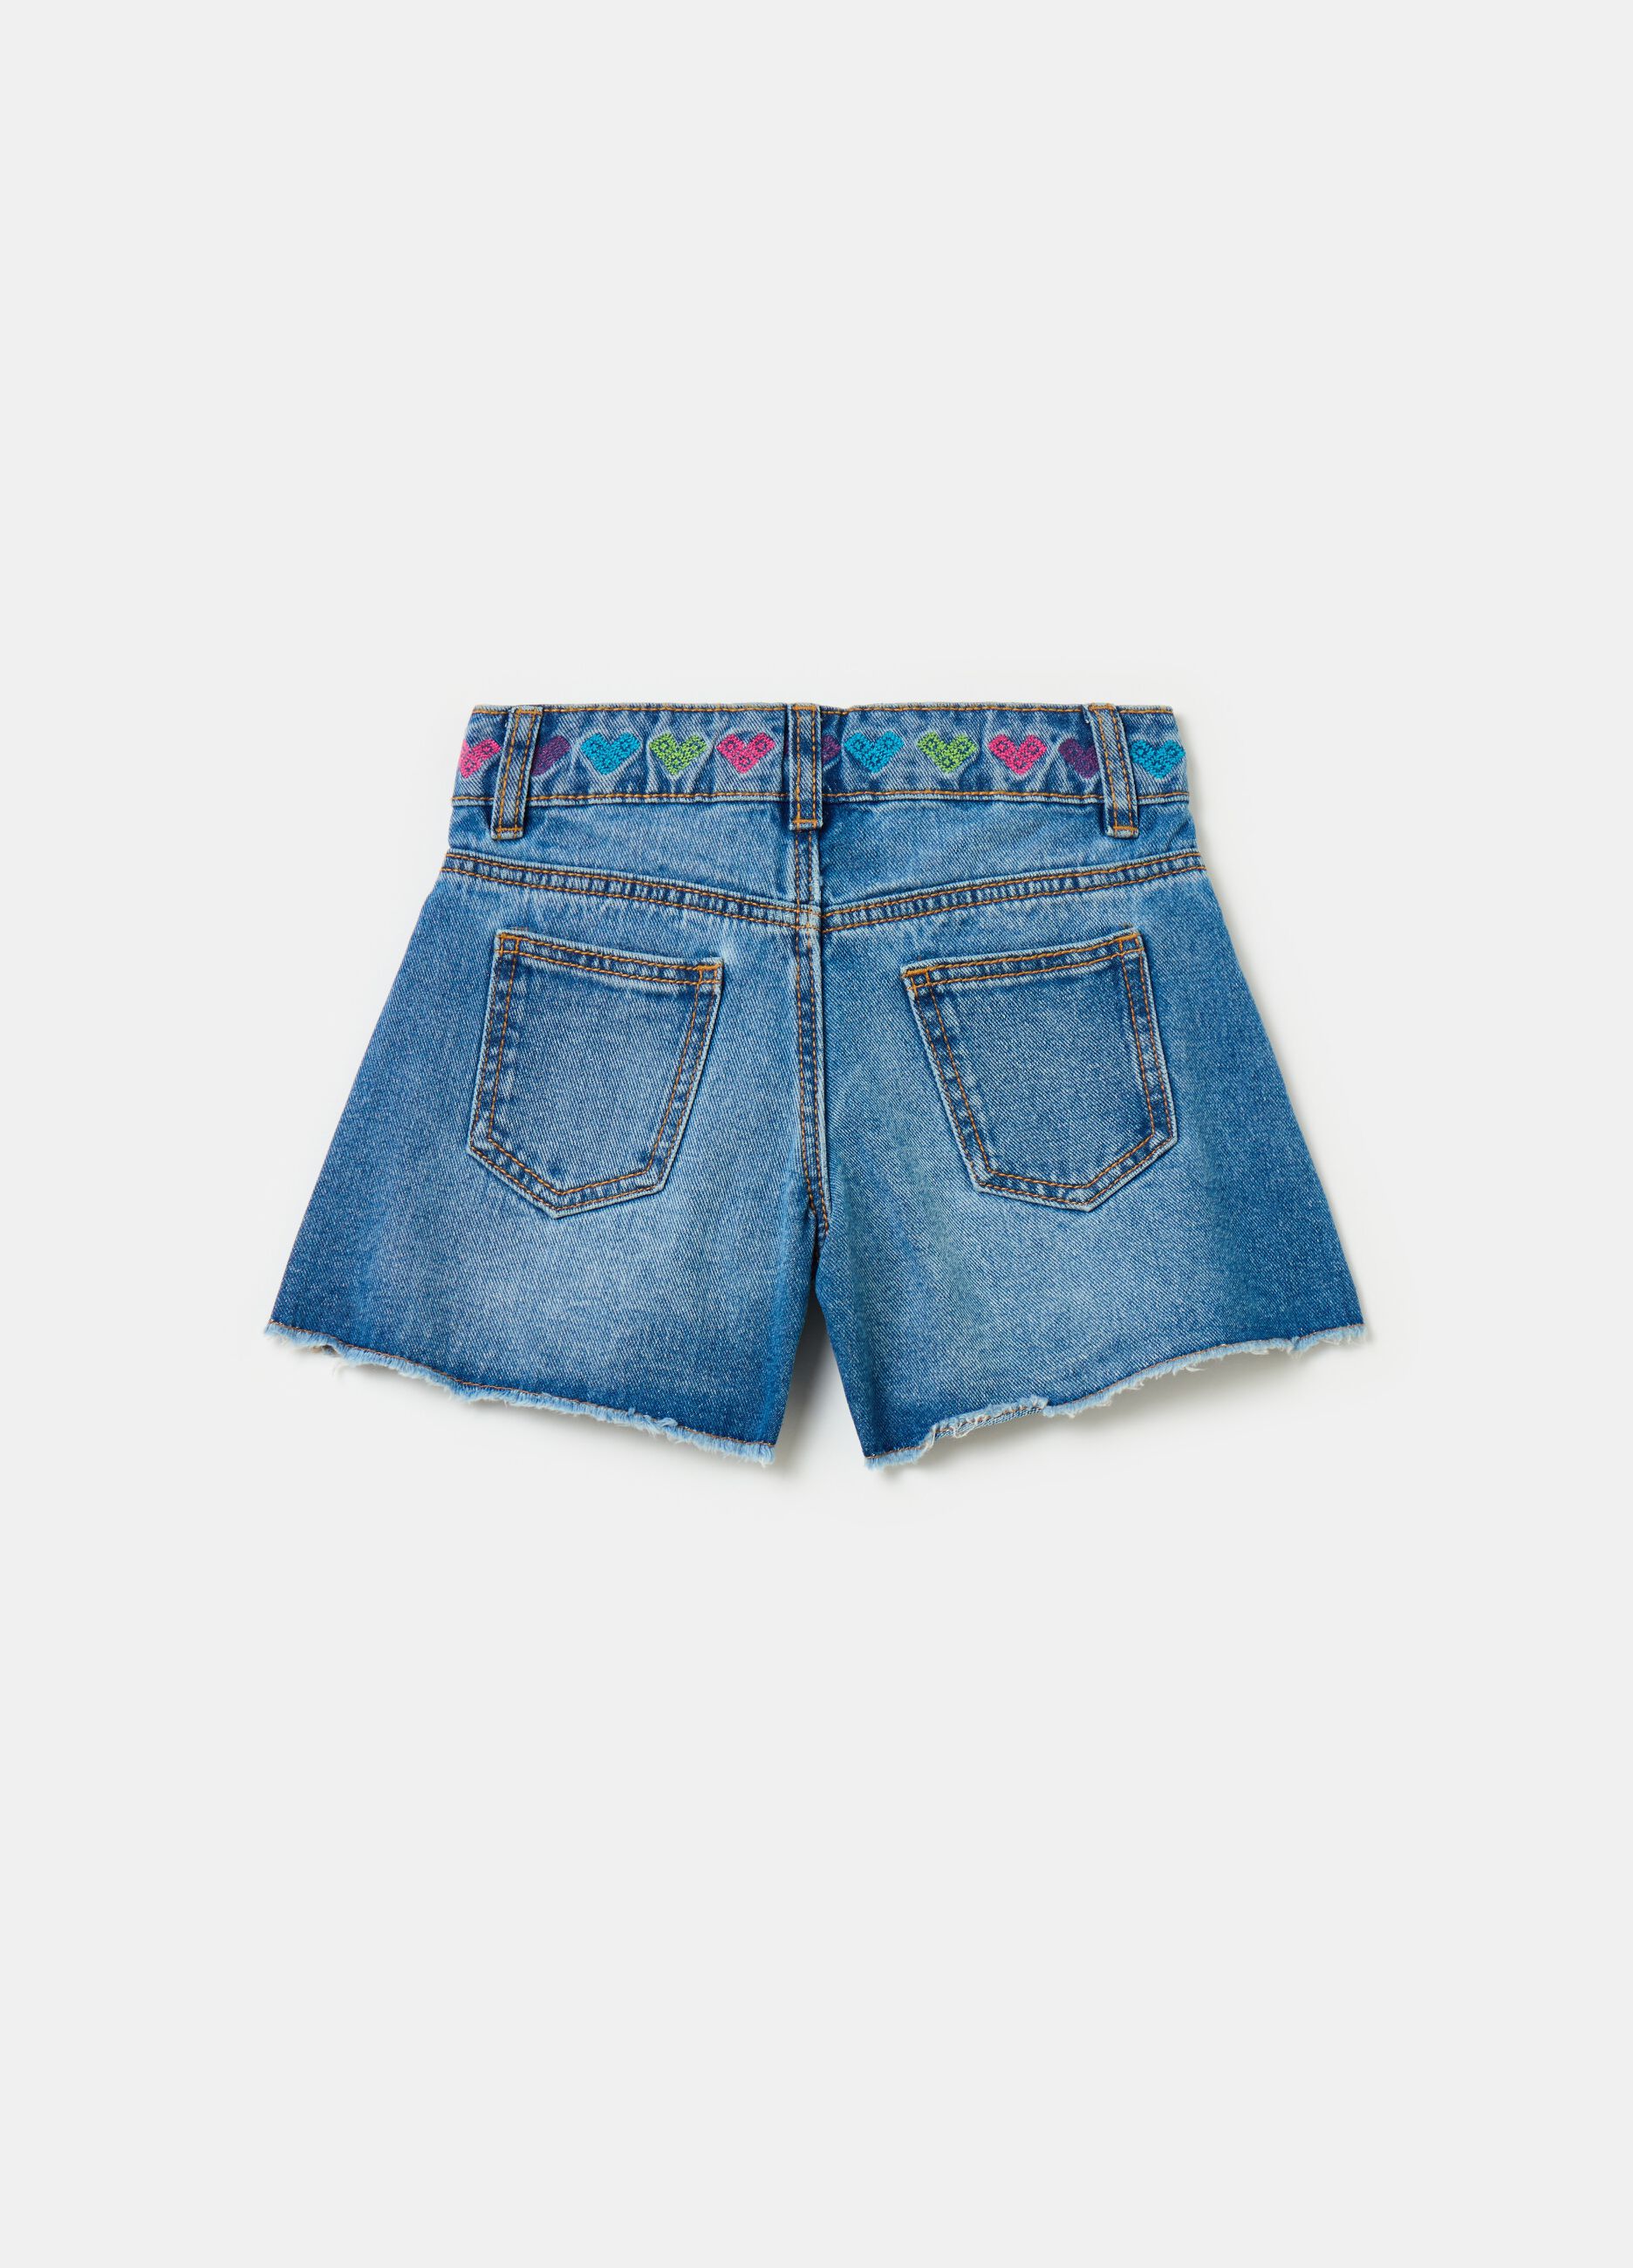 Denim shorts with hearts embroidery